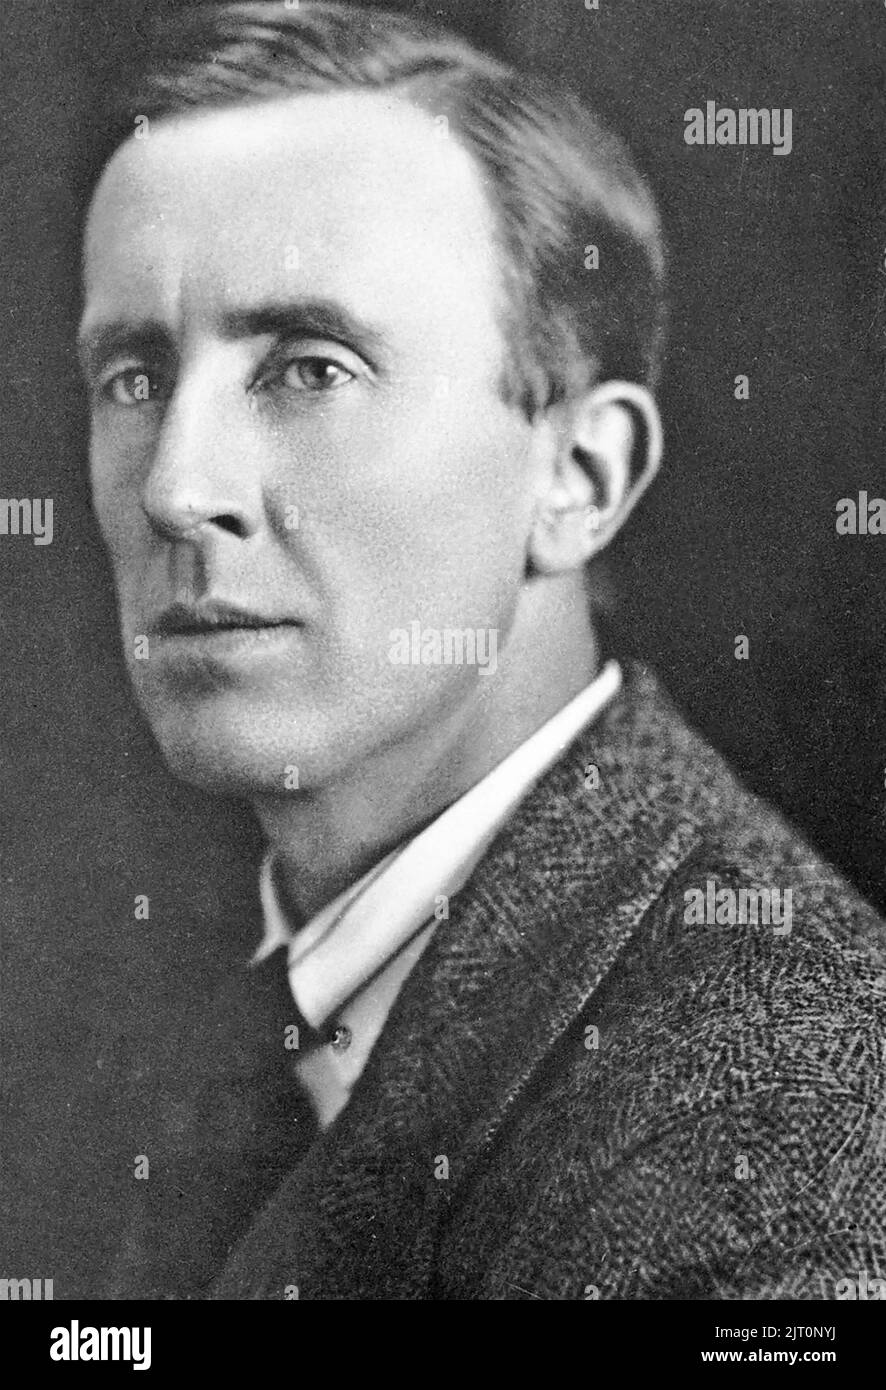 J.R.R.TOLKIEN (1892-19730 English author, poet and academic about 1925 Stock Photo